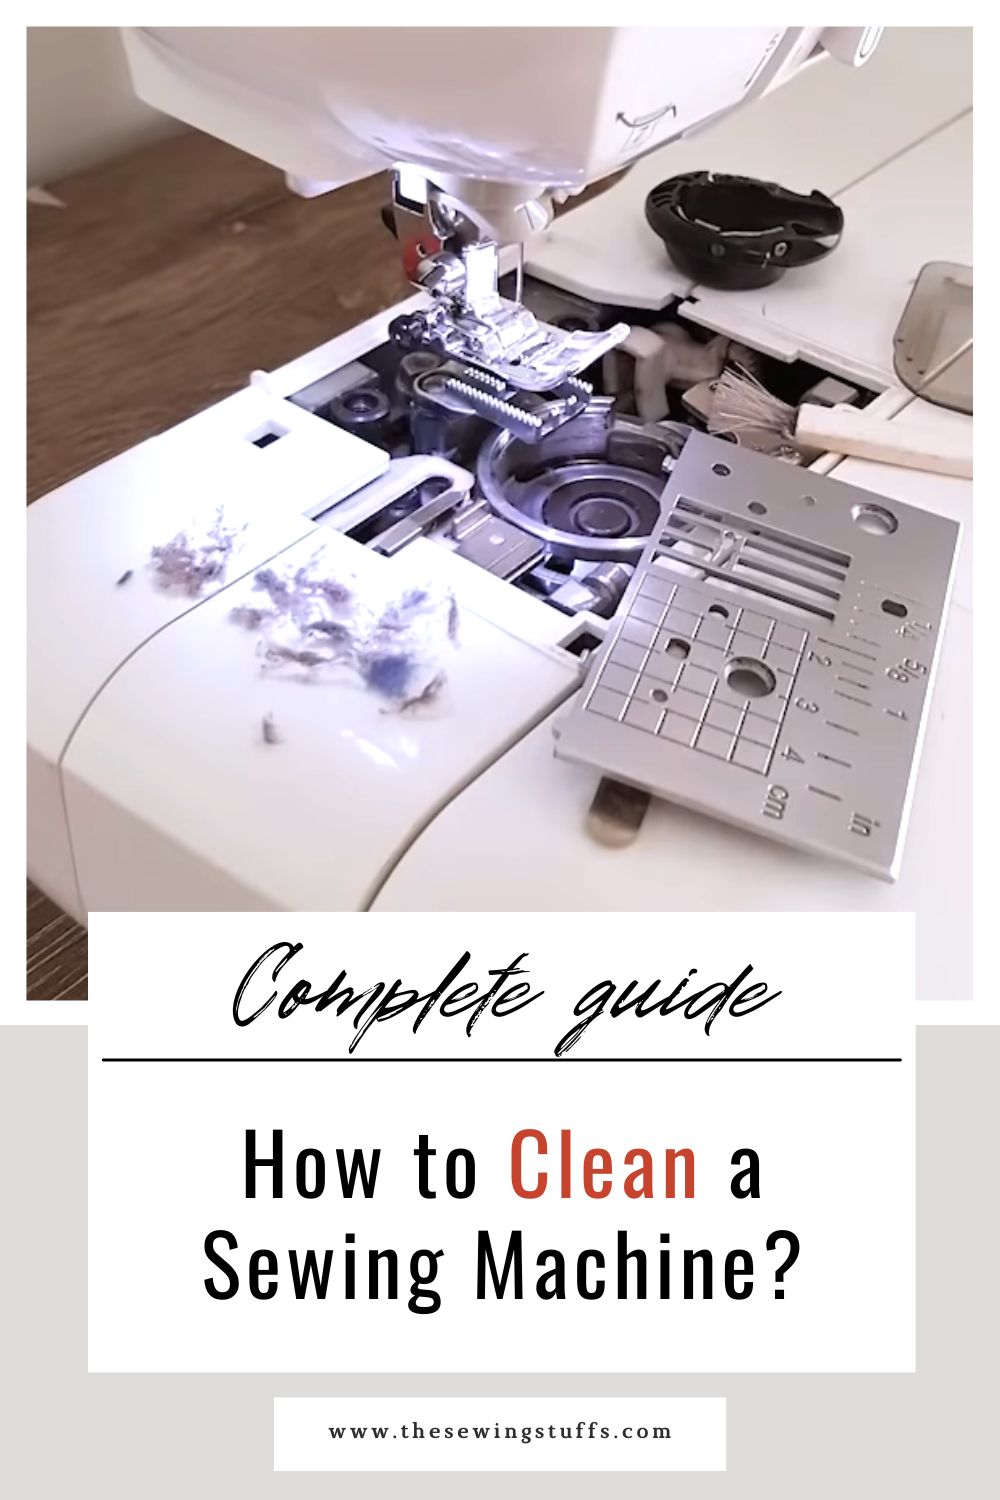 How to clean a sewing machine